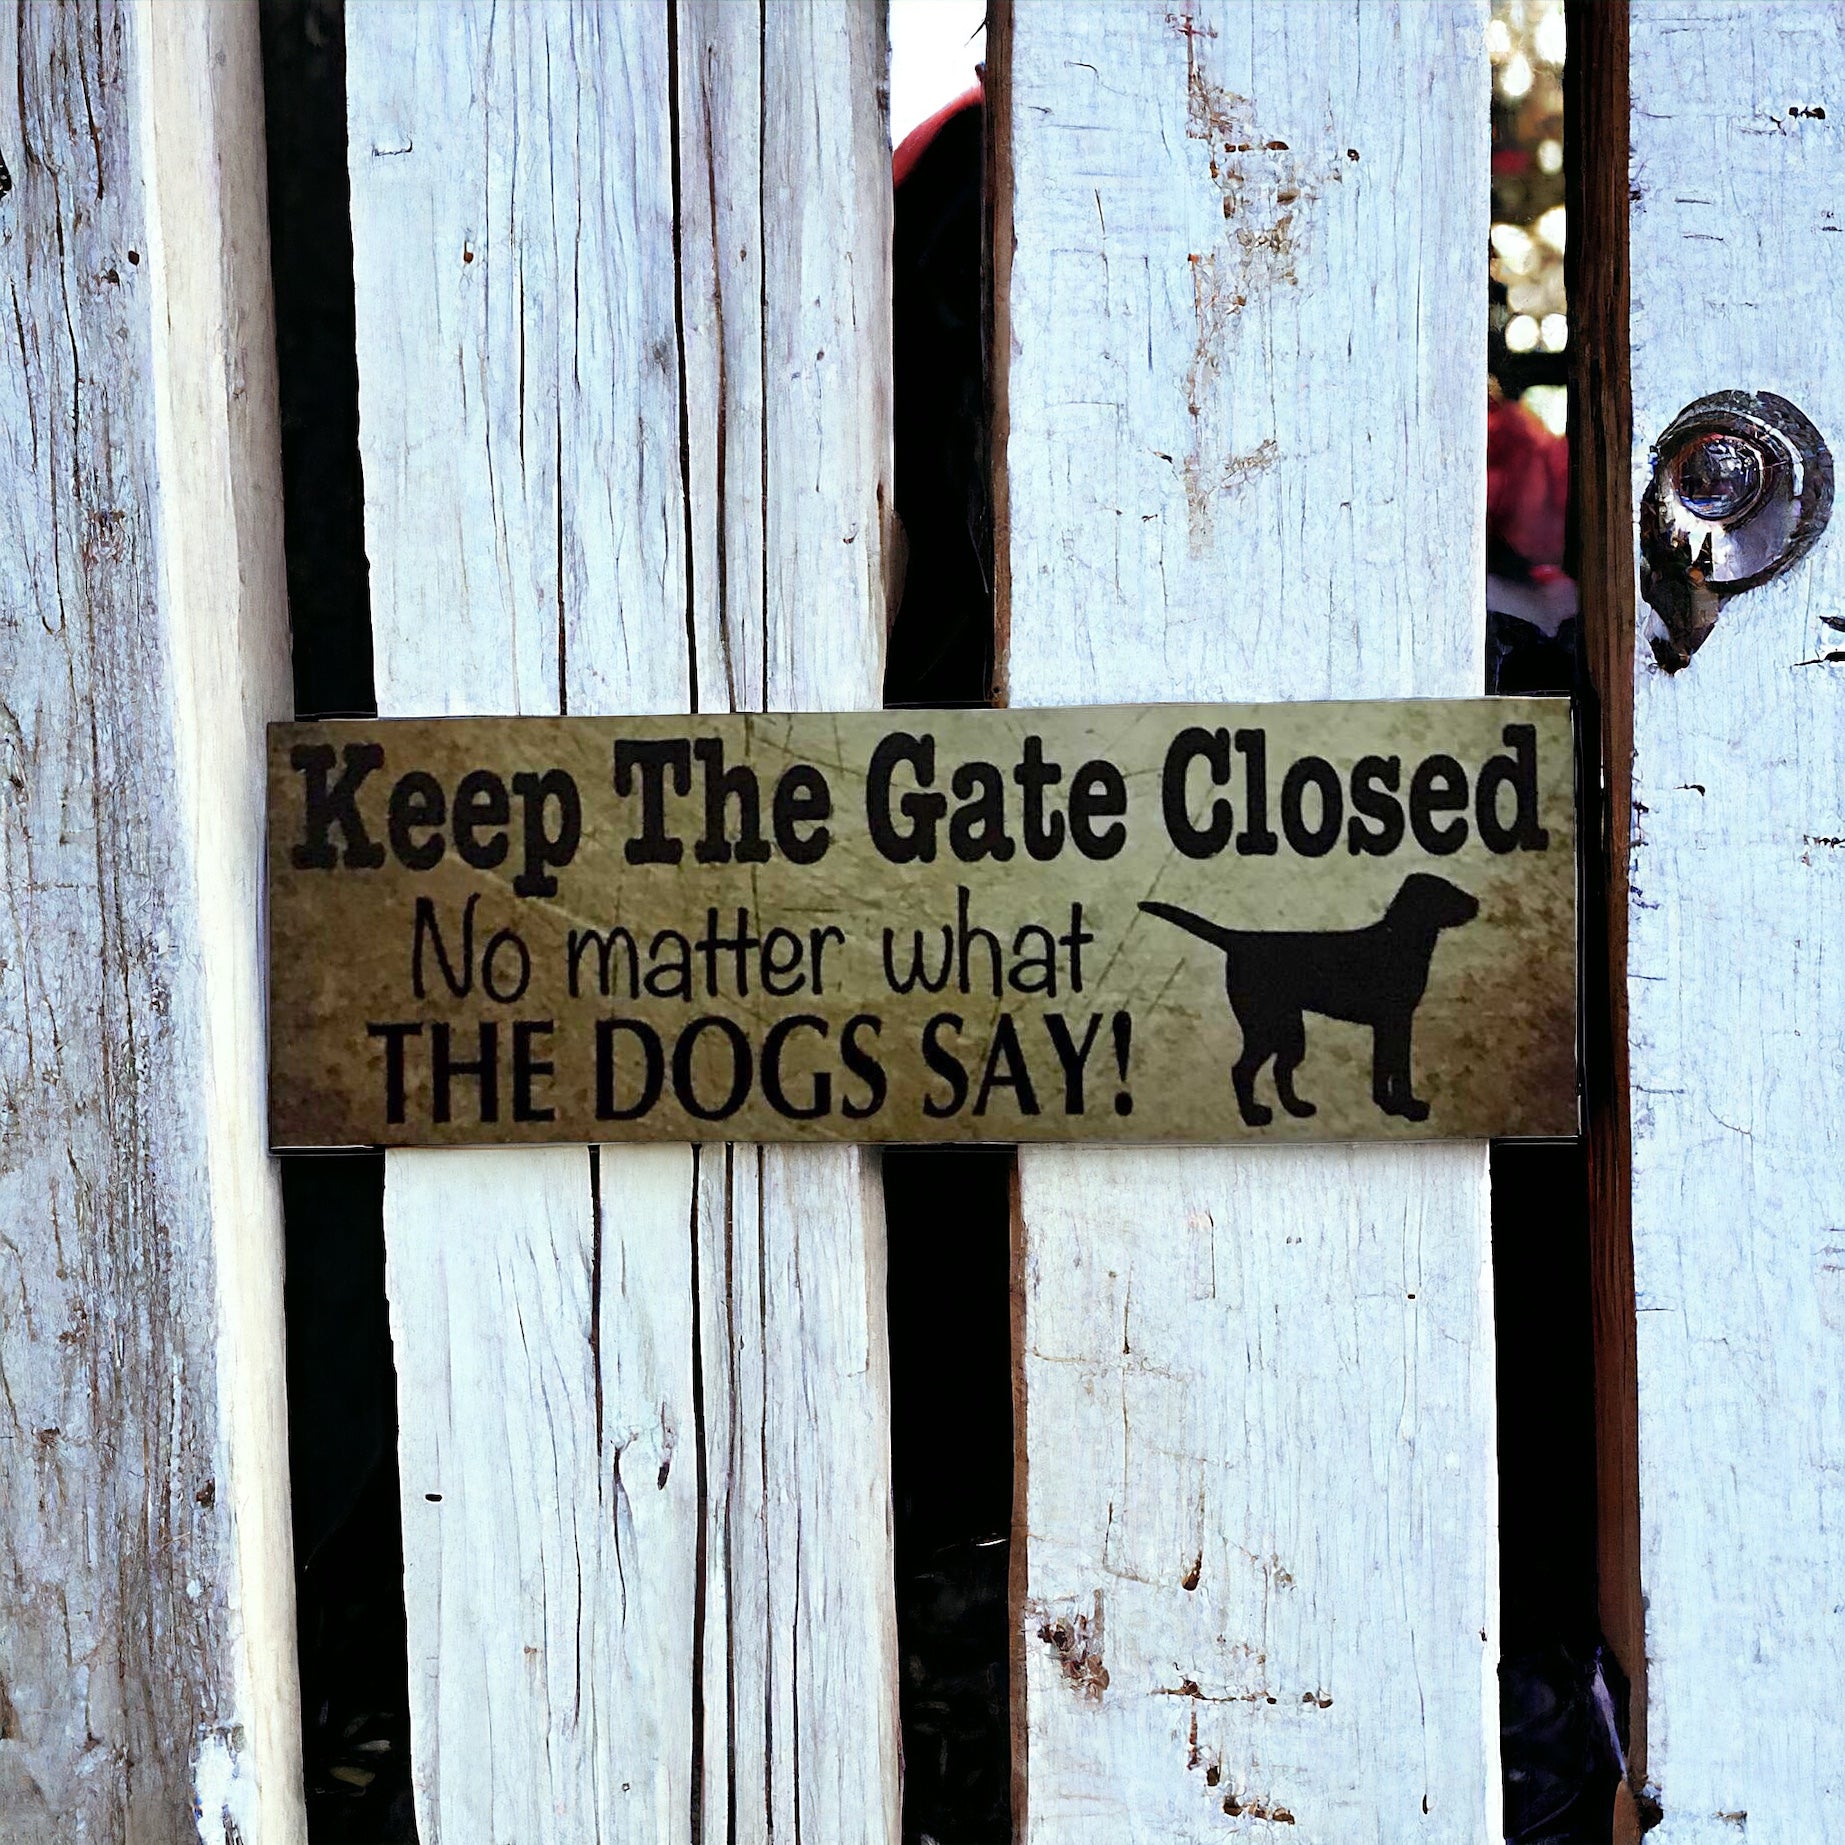 Keep The Gate Closed Vintage Dog or Dogs Sign - The Renmy Store Homewares & Gifts 